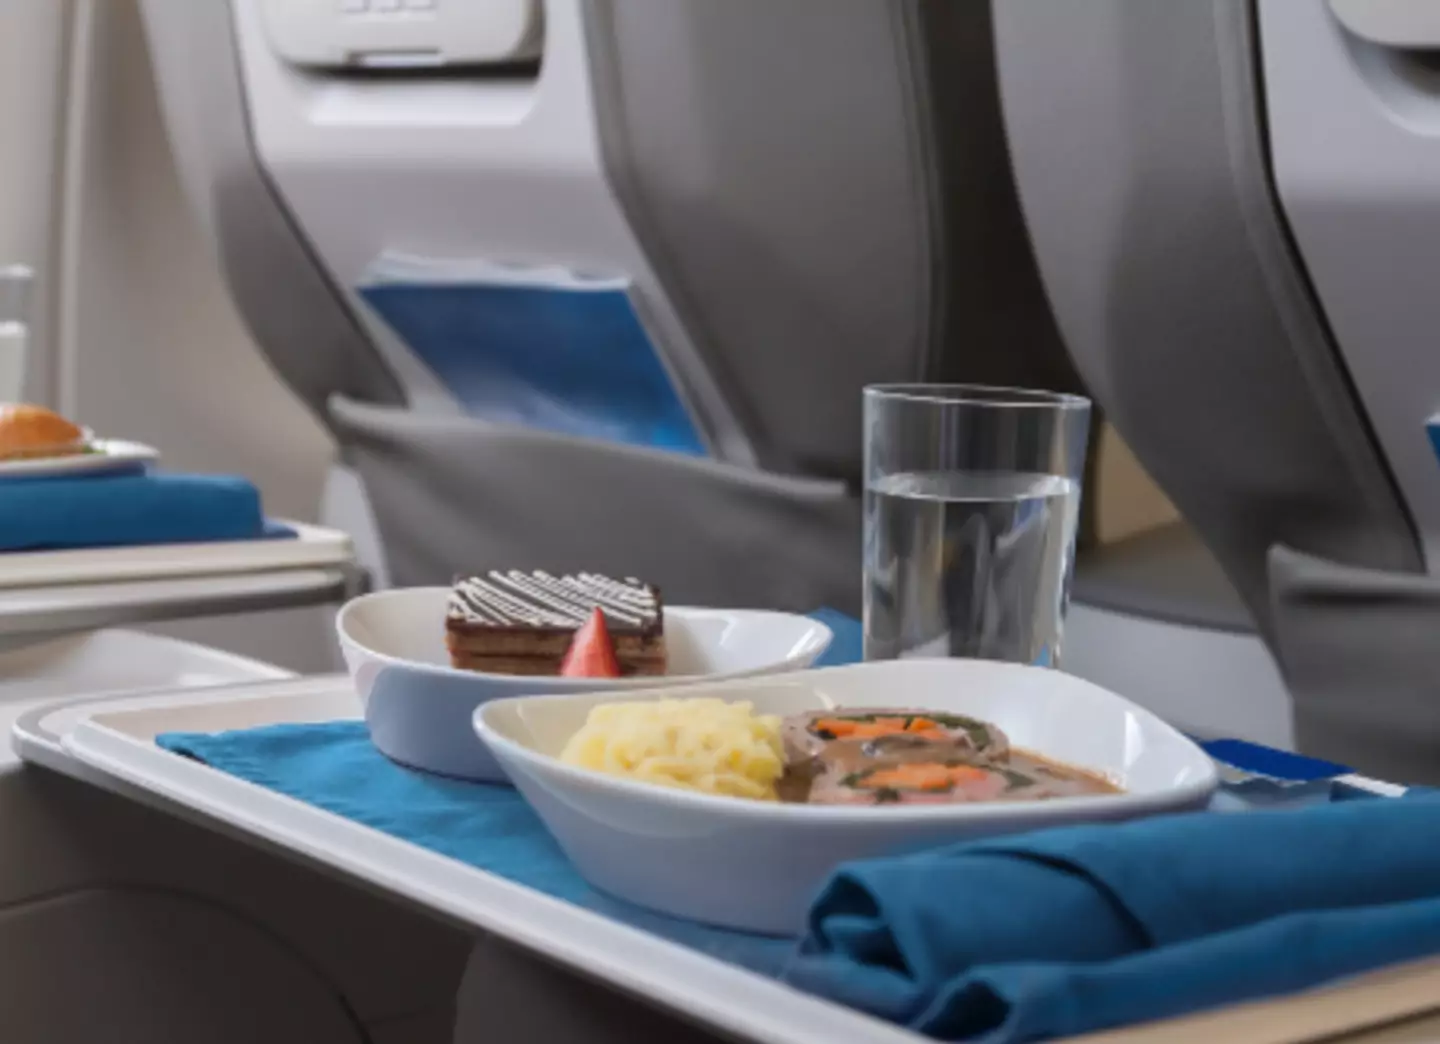 Let's face it, plane food isn't known for being the best.